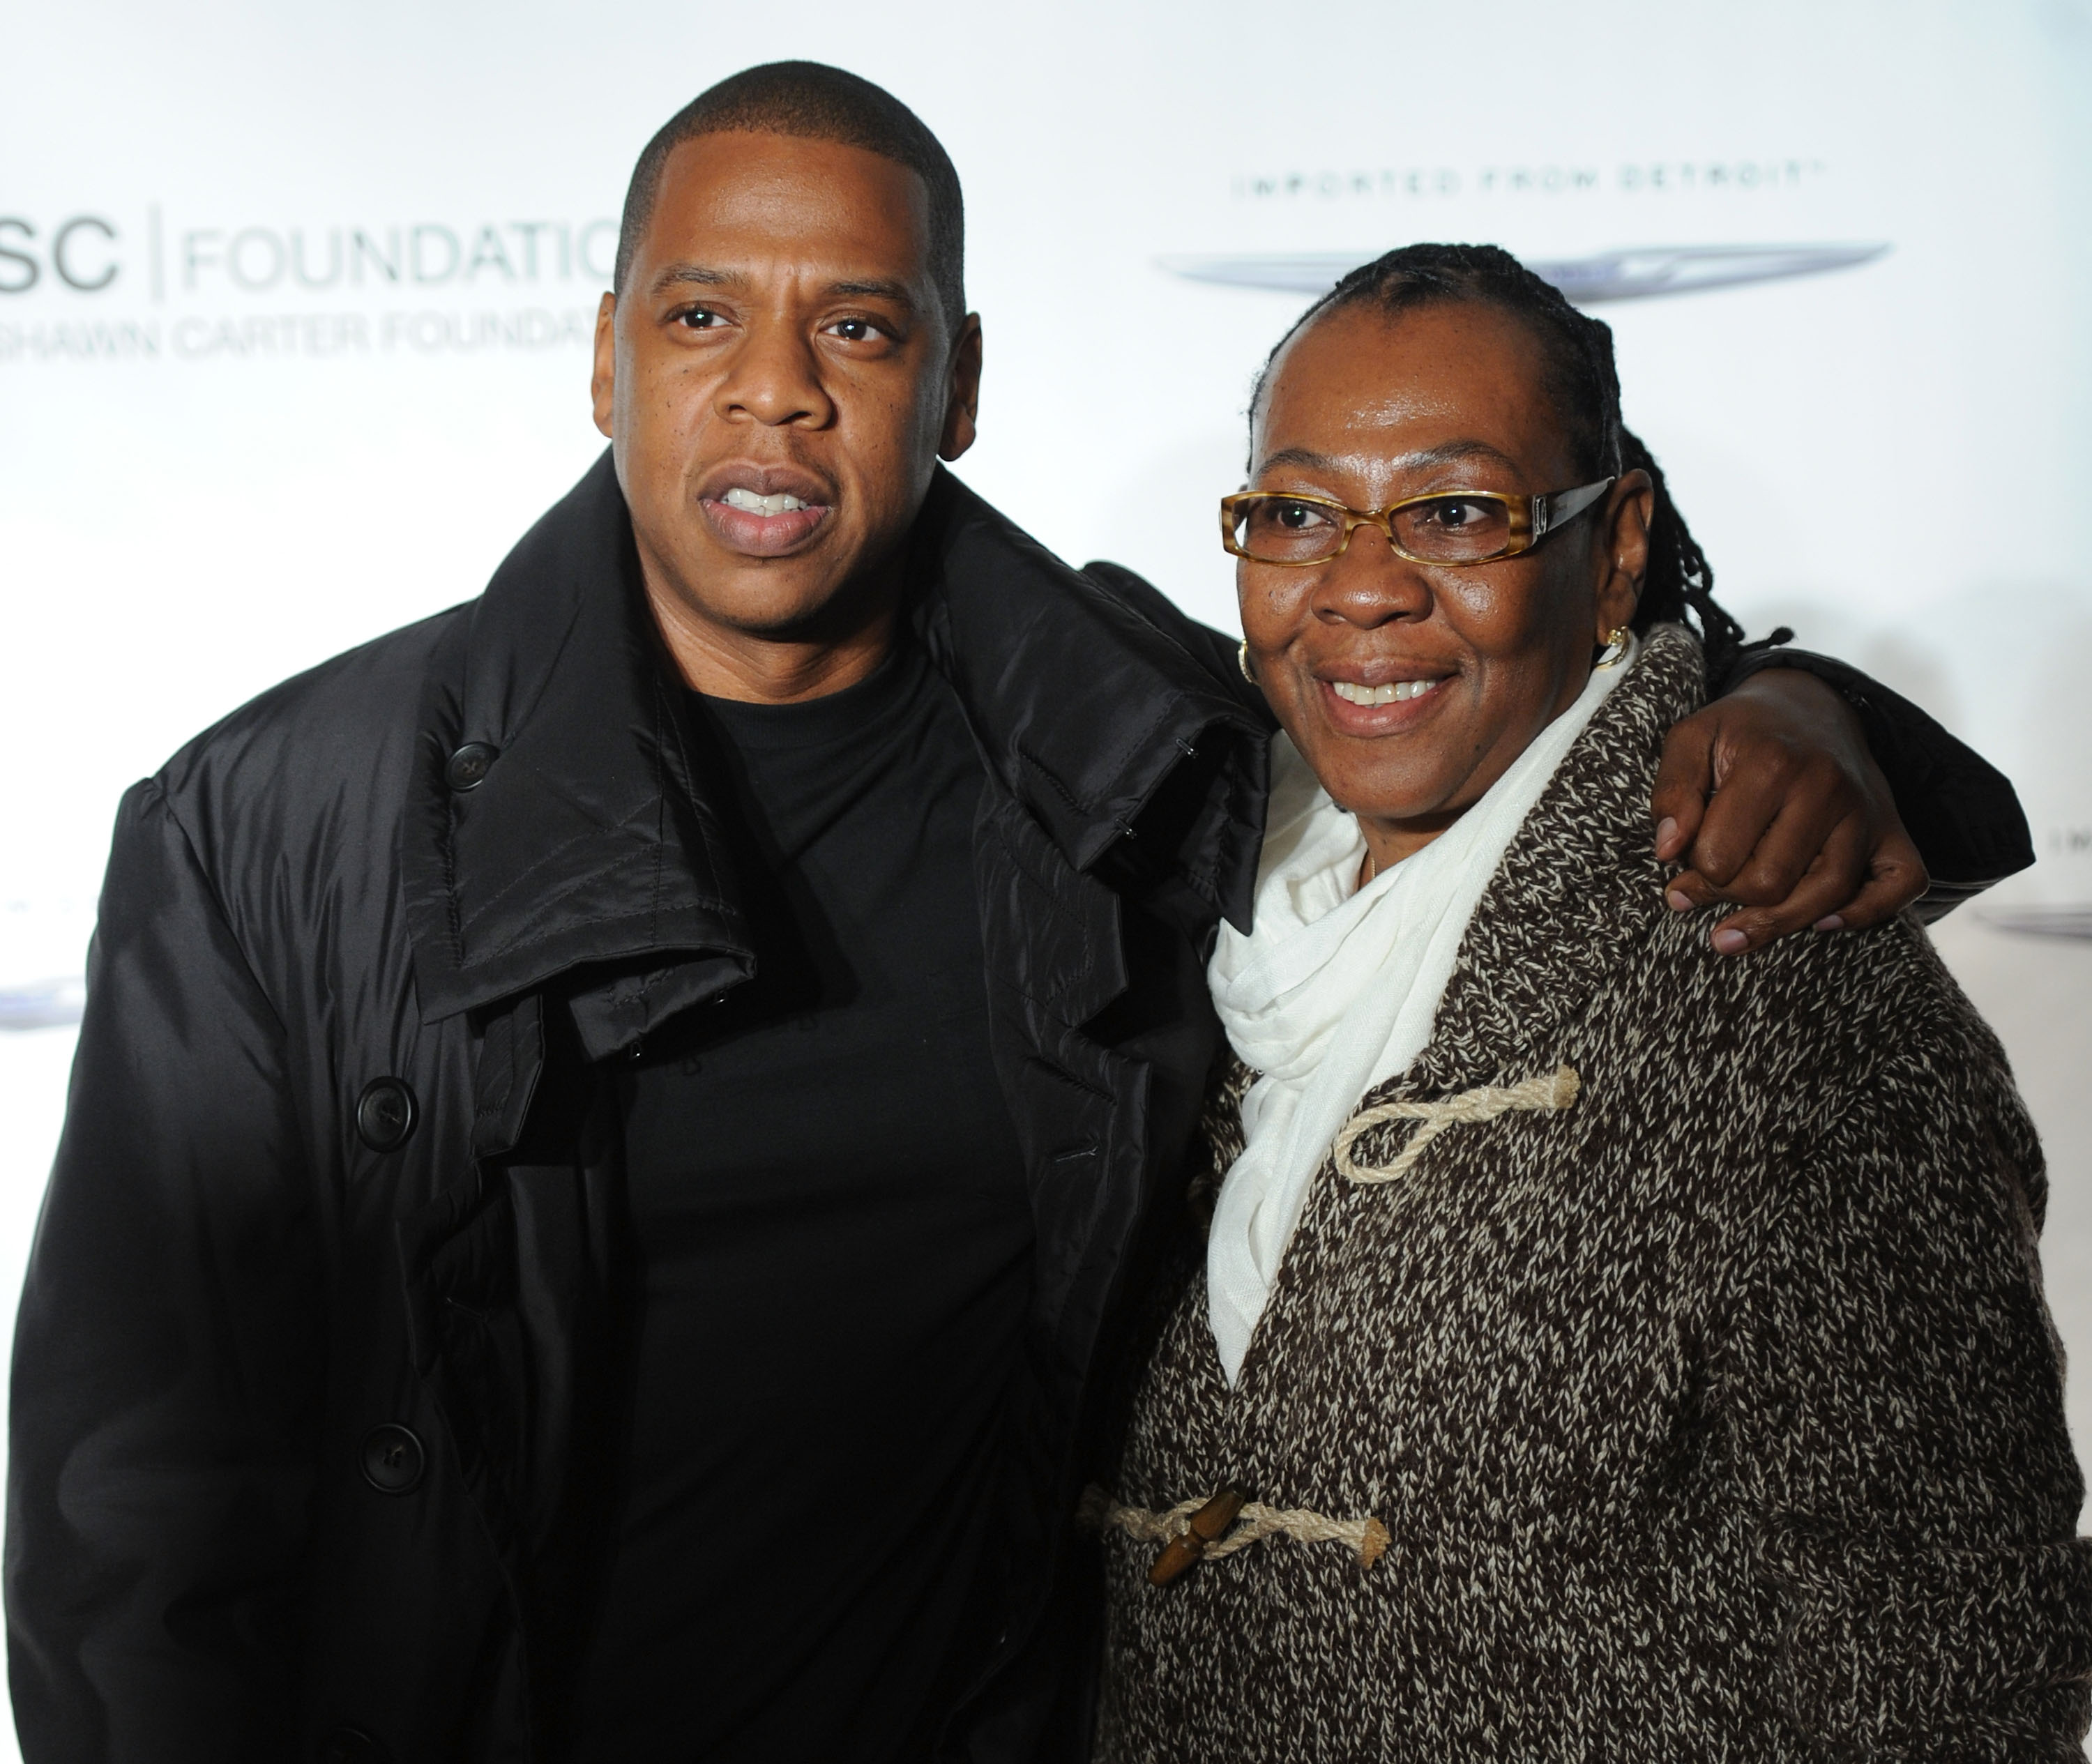 Jay-Z and his mother Gloria Carter attend the "Making The Ordinary Extraordinary" hosted by The Shawn Carter Foundation at Pier 54 on September 29, 2011, in New York City. | Source: Getty Images